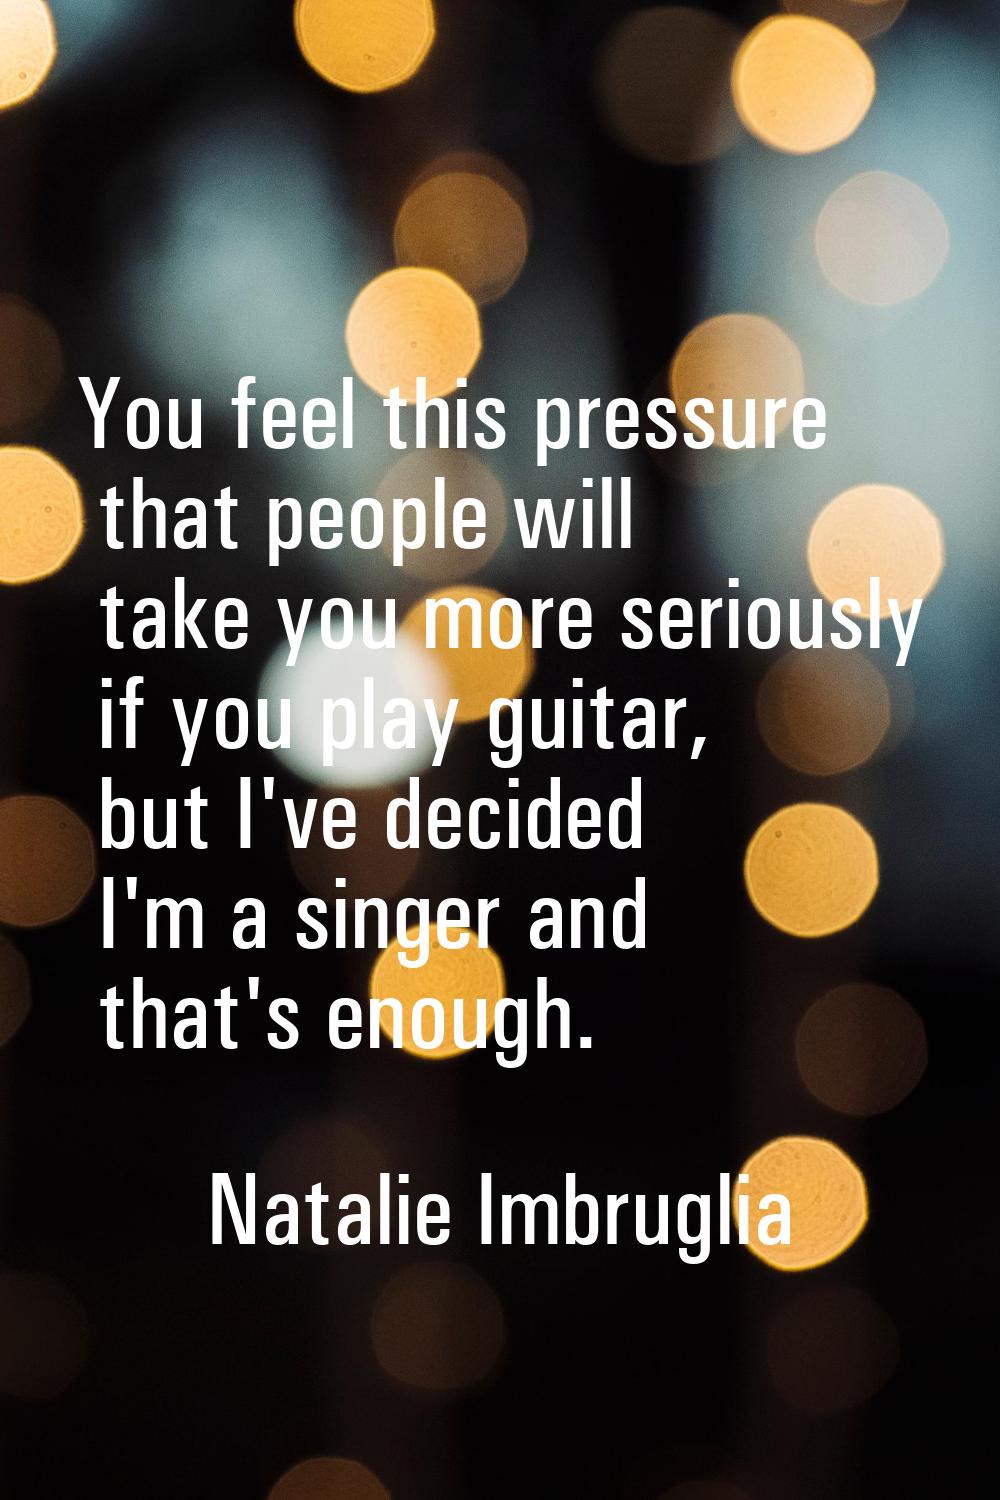 You feel this pressure that people will take you more seriously if you play guitar, but I've decide